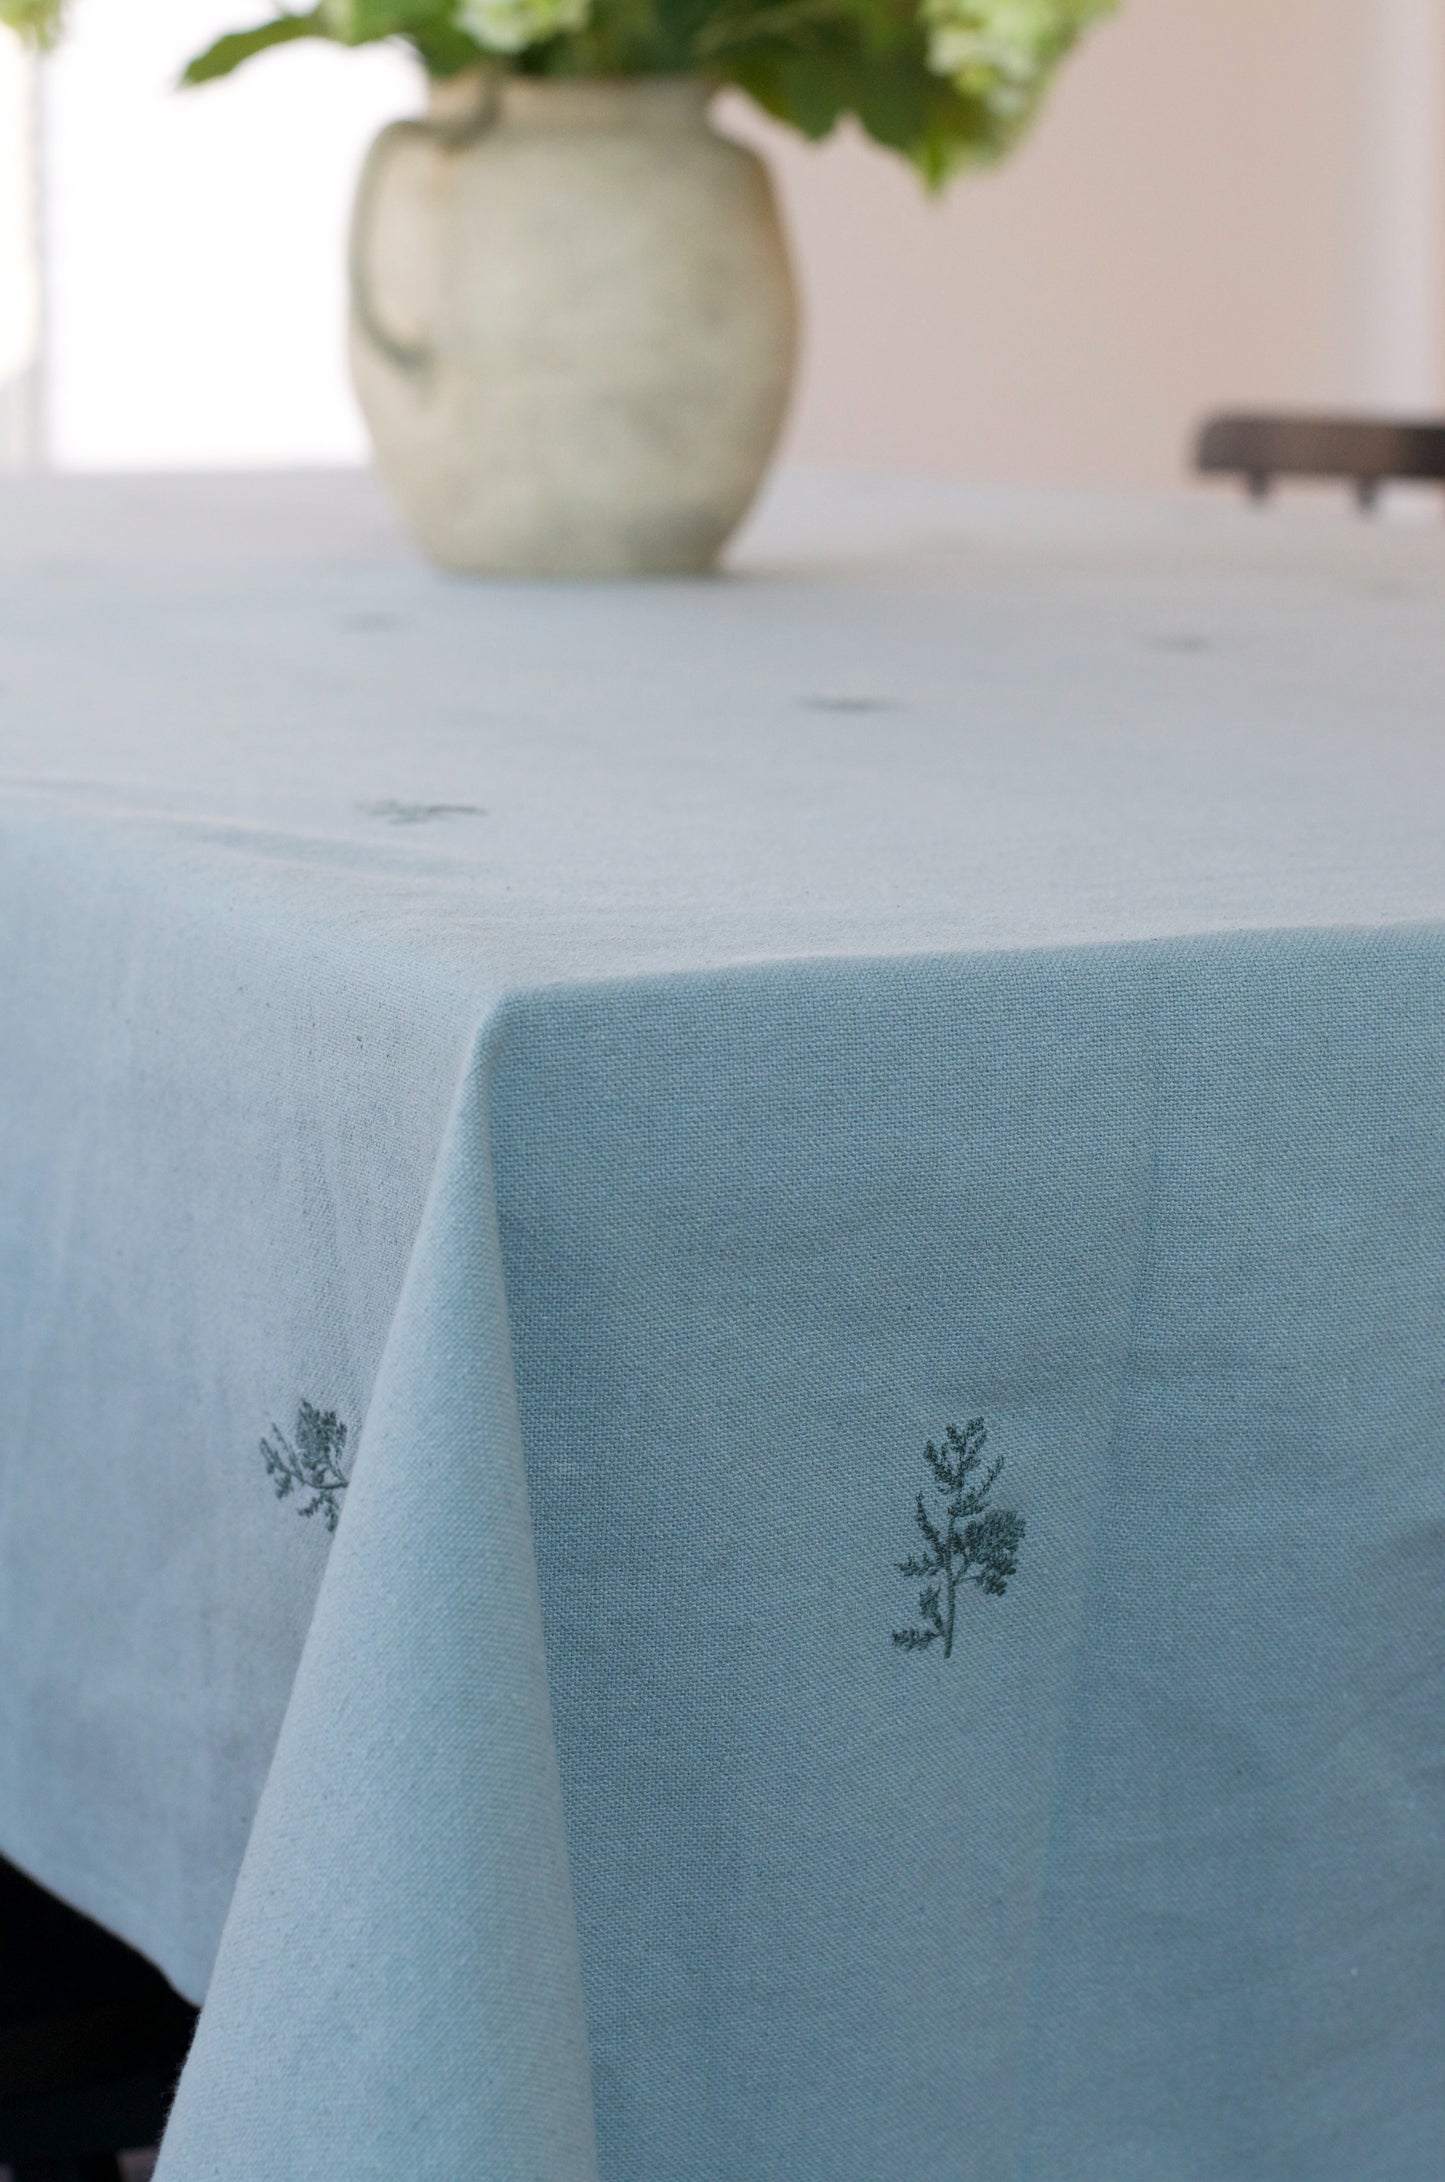 Floral Embroidered Tablecloth